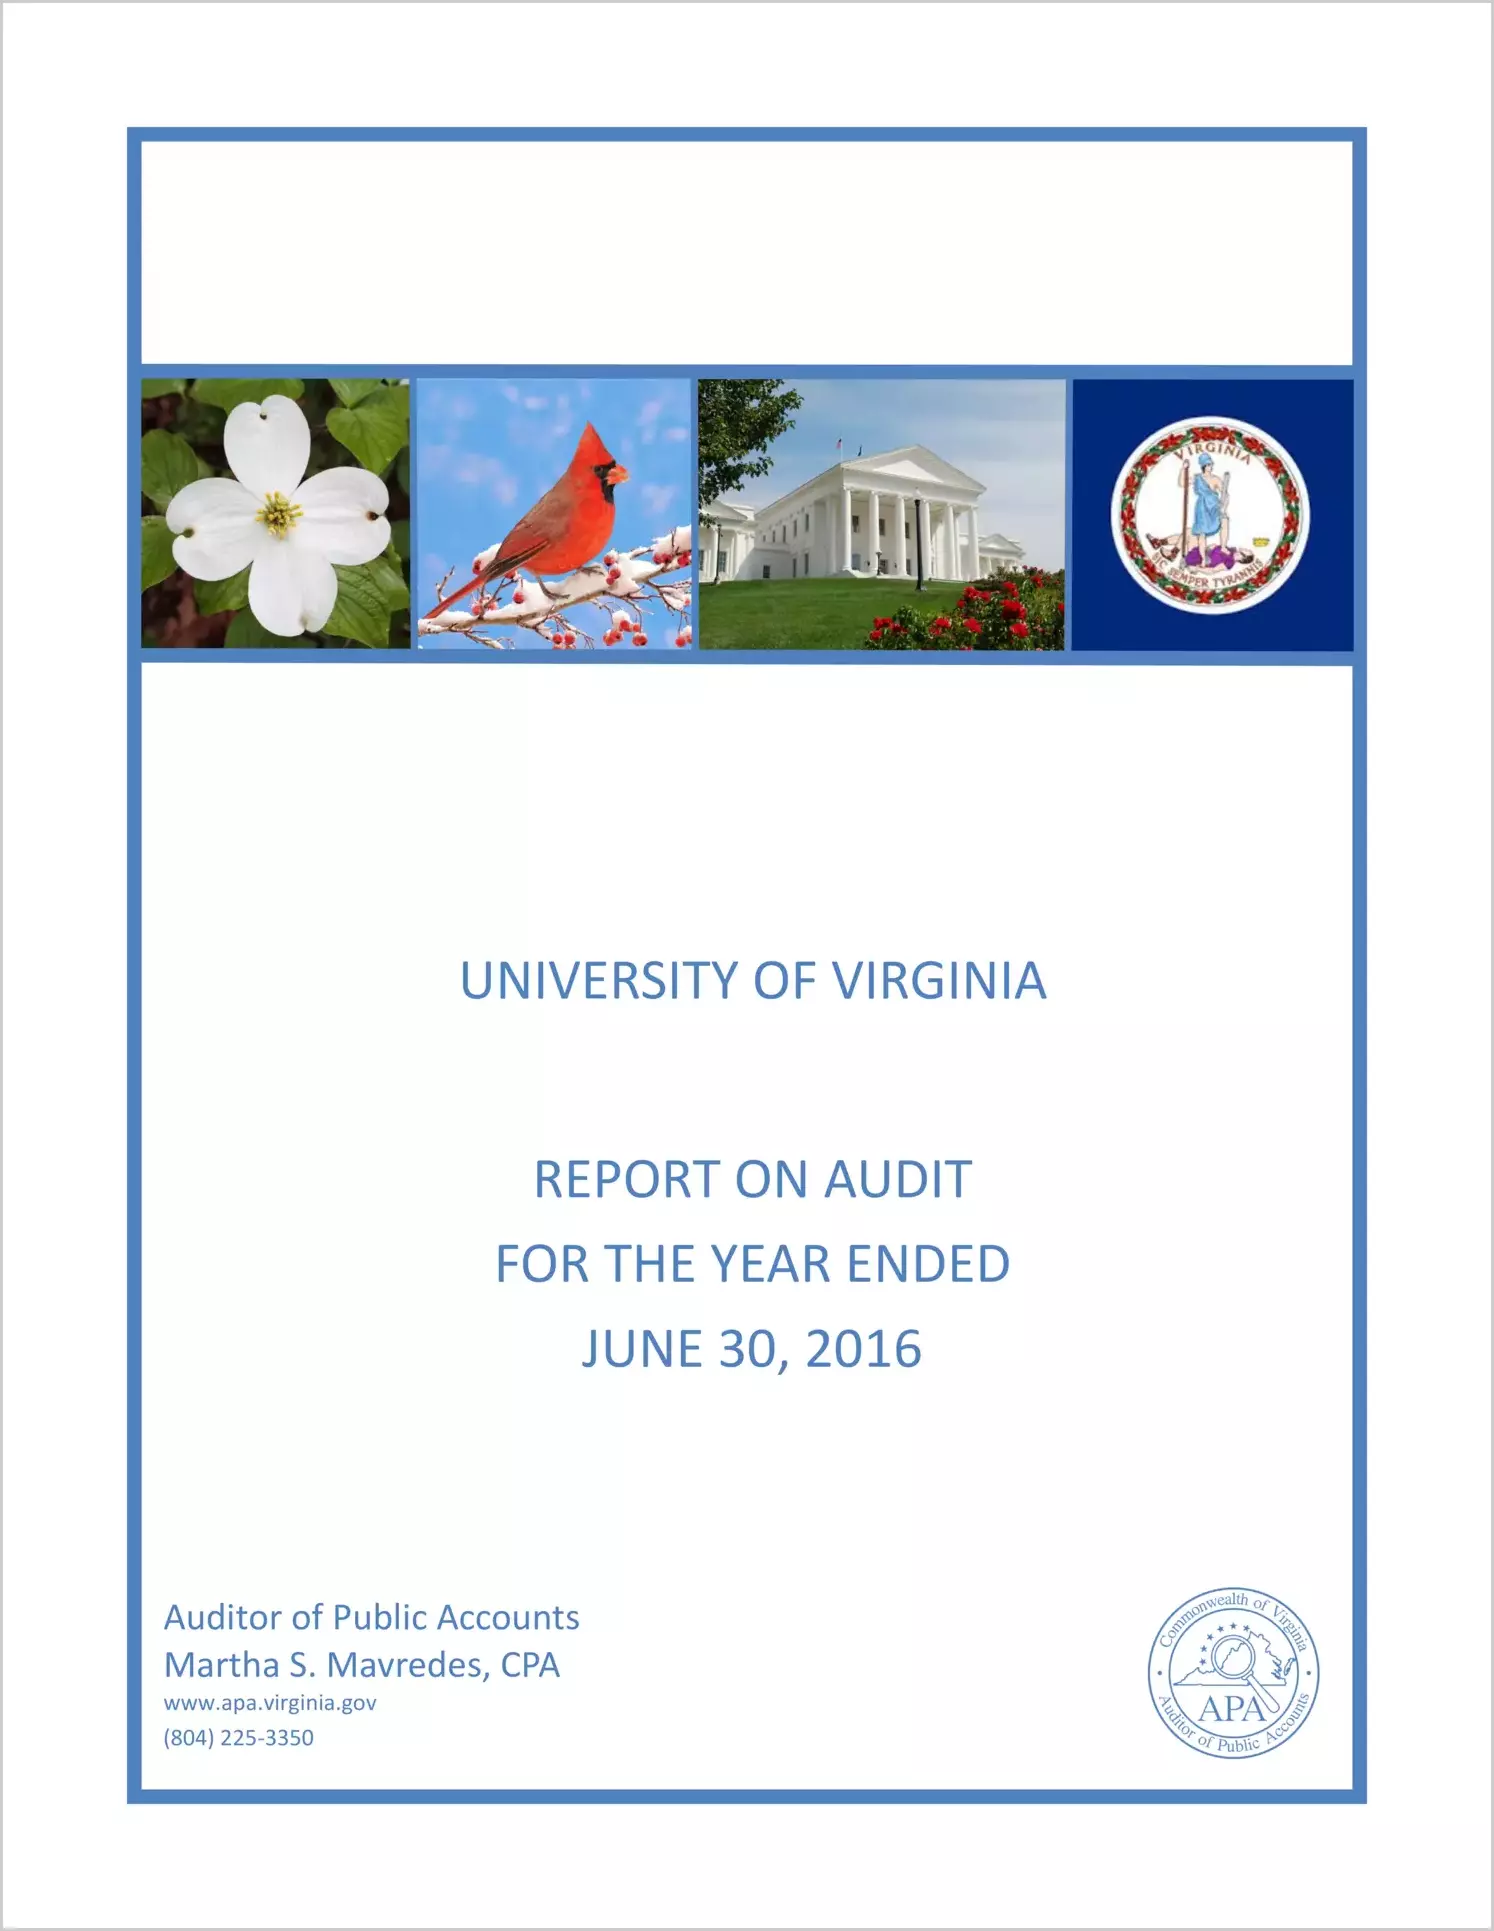 University of Virginia for the year ended June 30, 2016